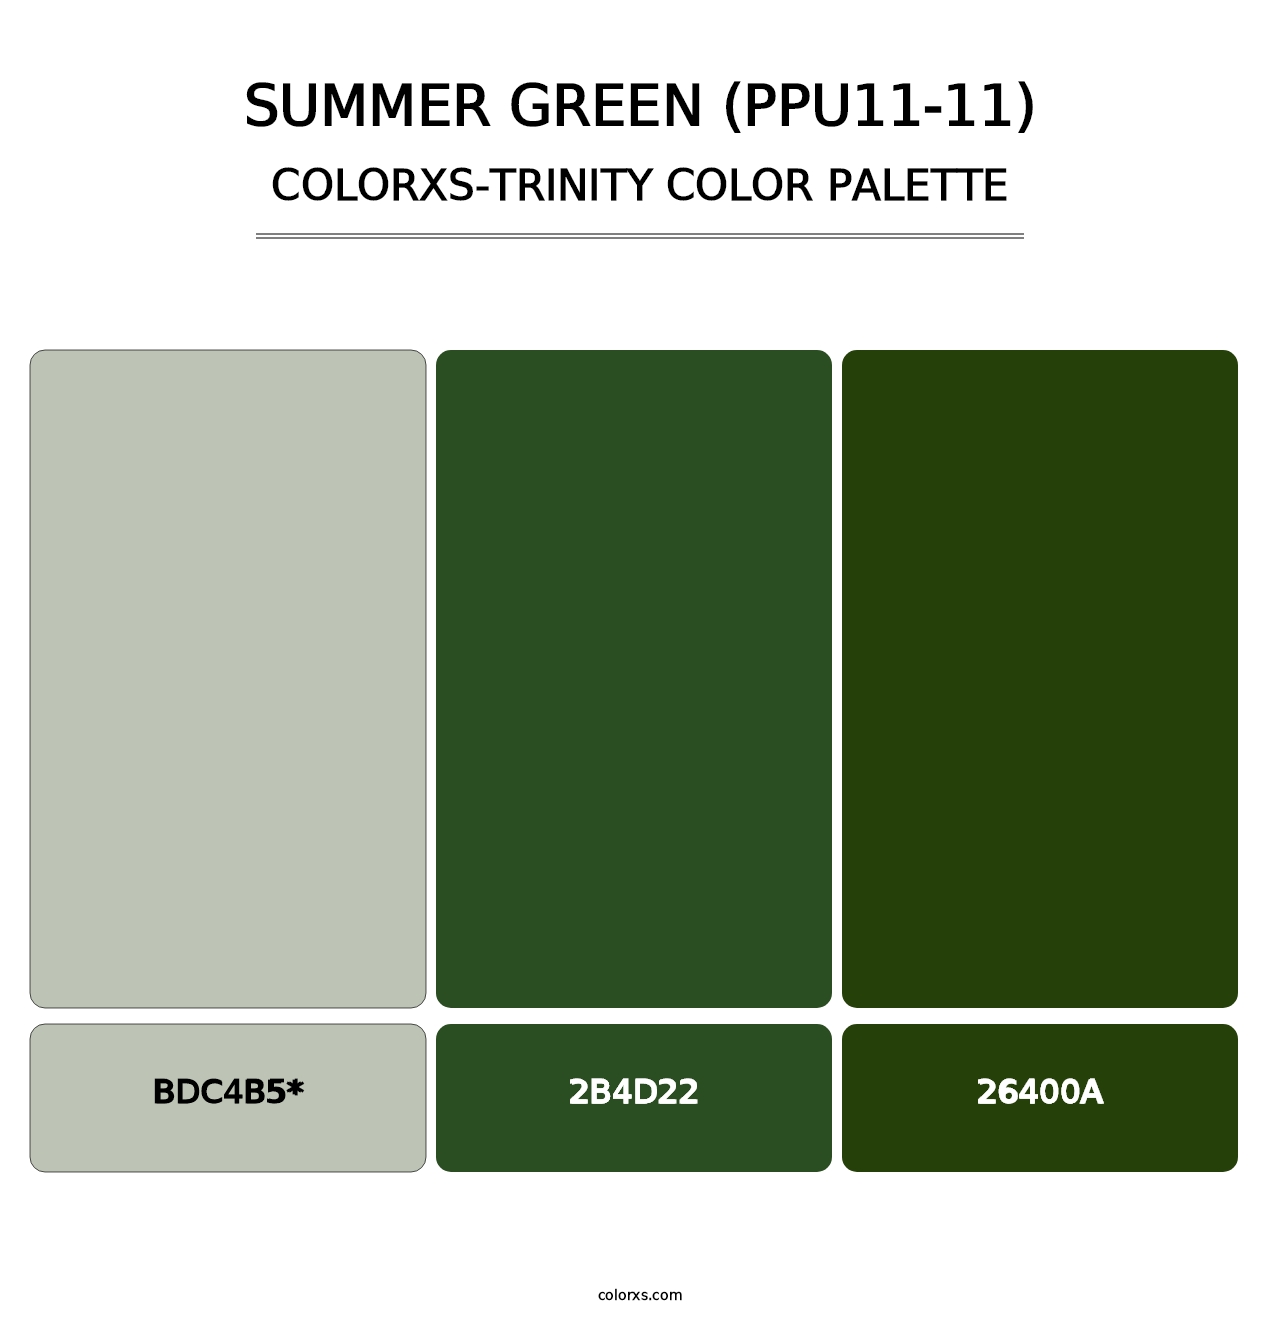 Summer Green (PPU11-11) - Colorxs Trinity Palette